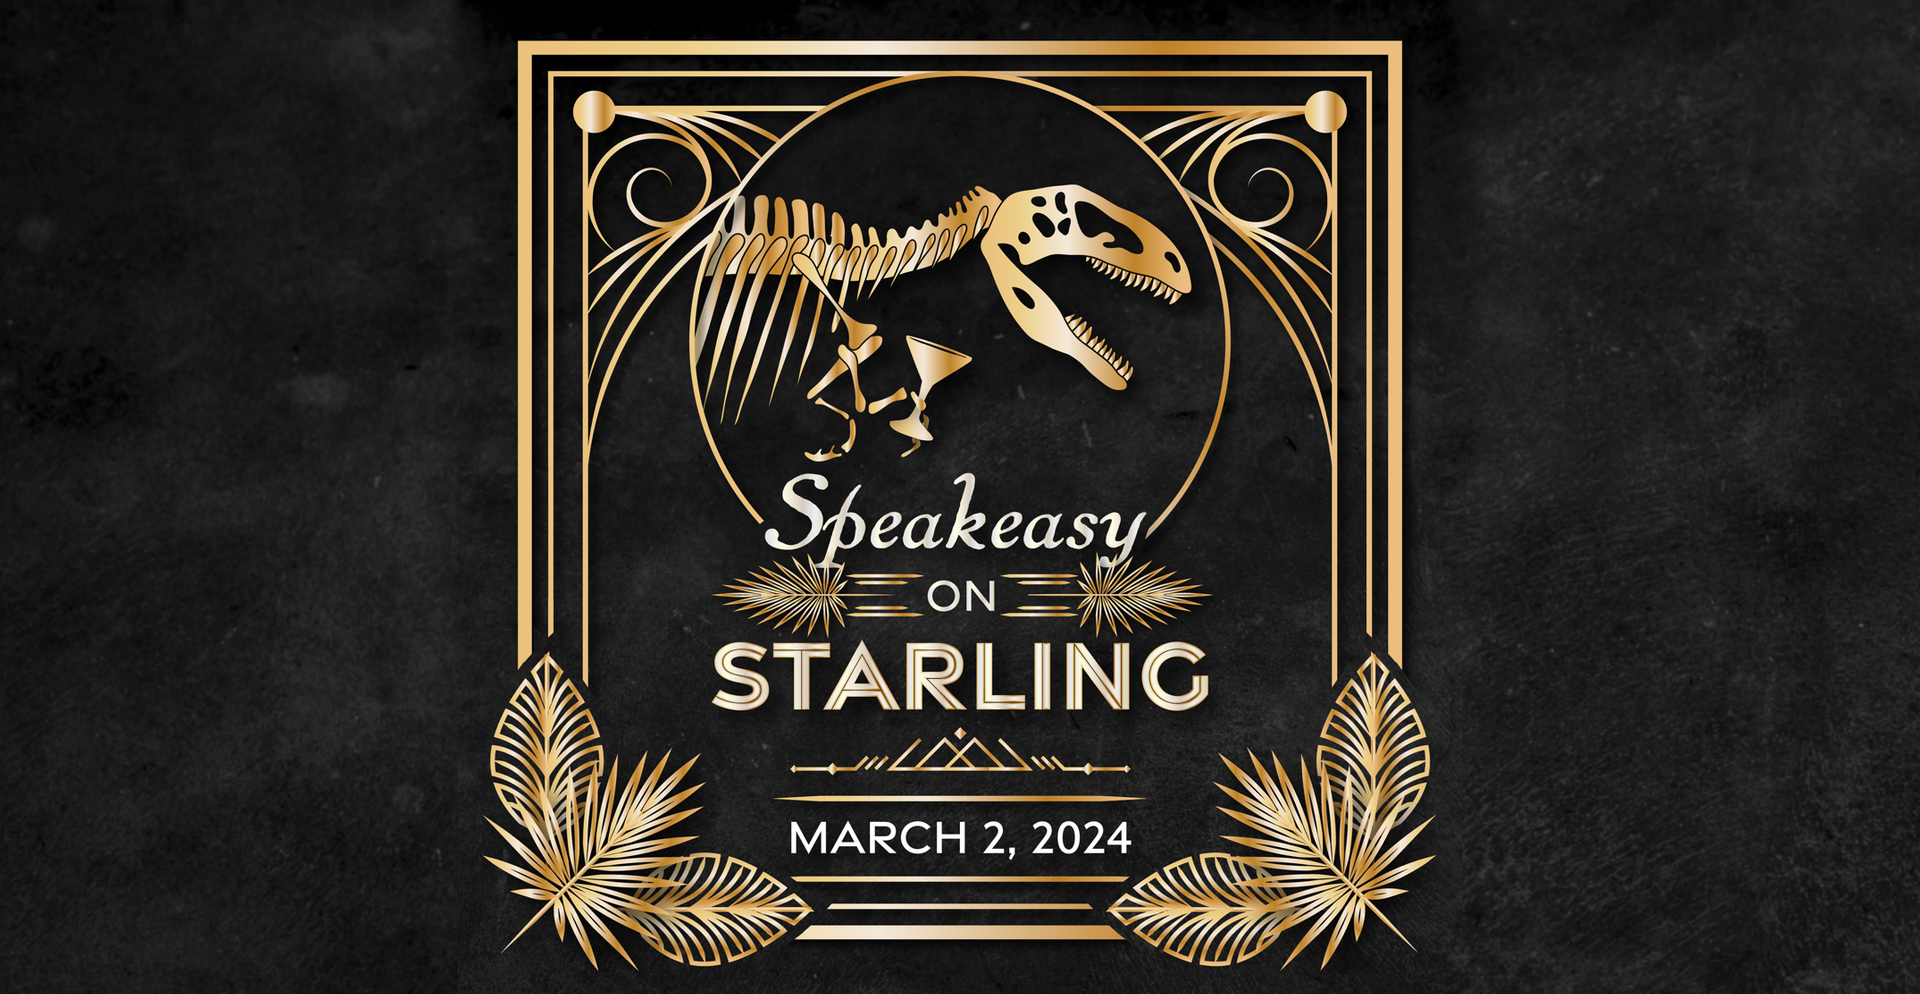 Speakeasy on Starling Even Cover Image